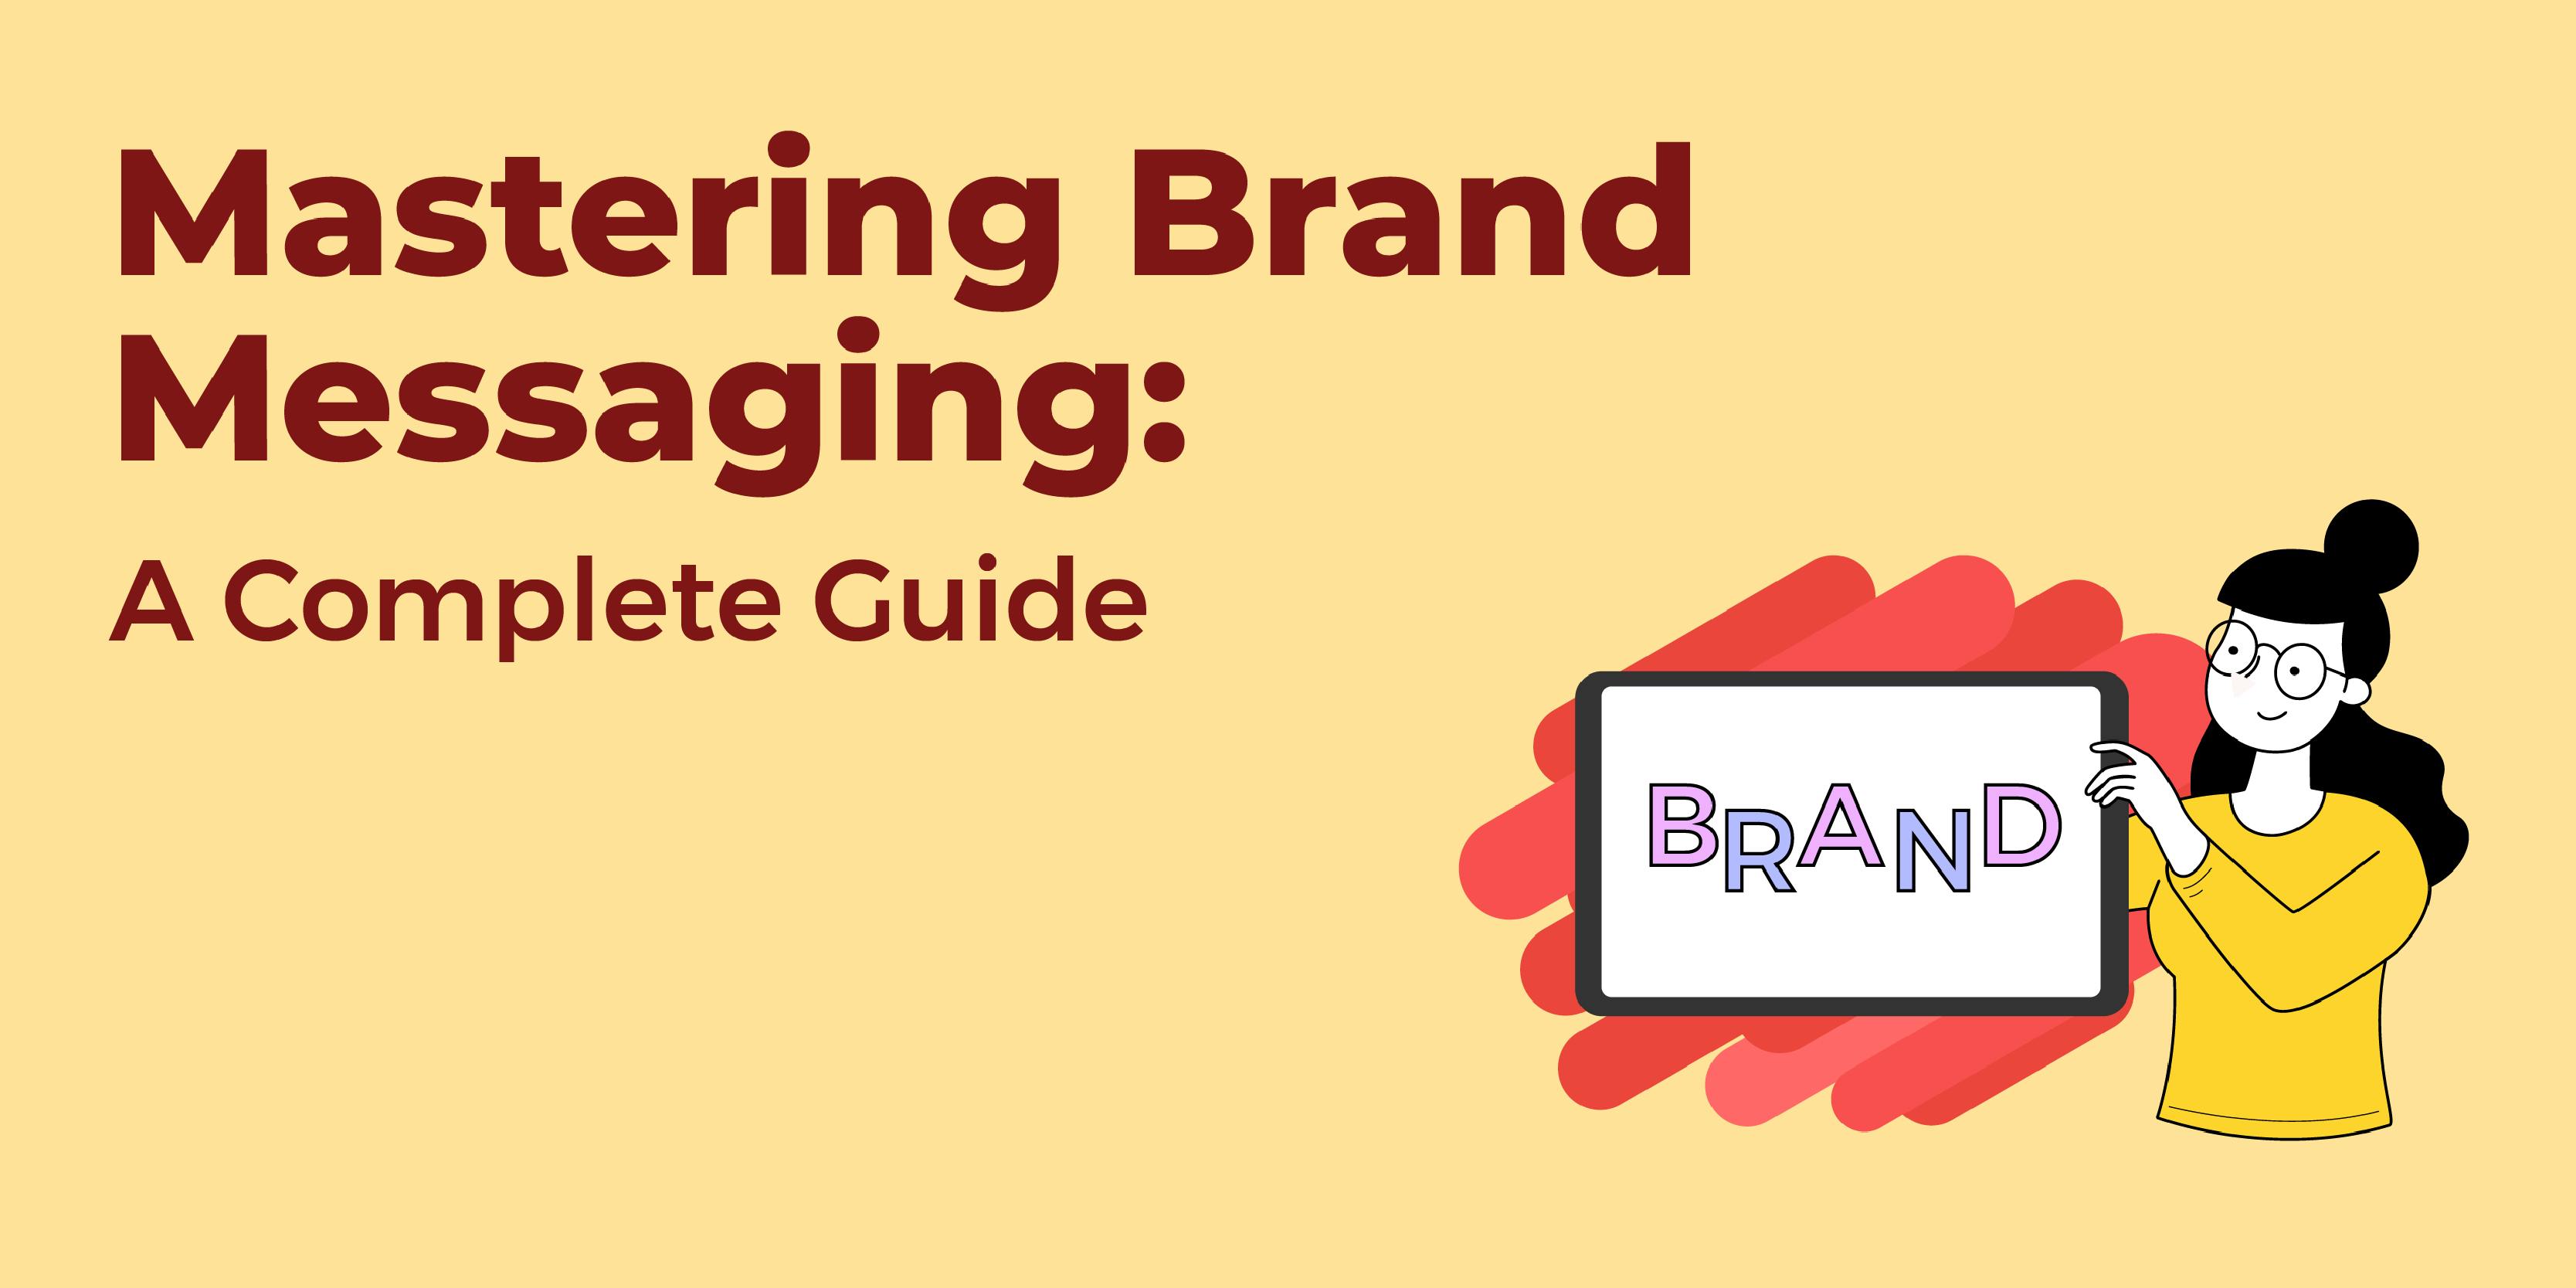 Brand Messaging What Is It? - Beginner's Guide